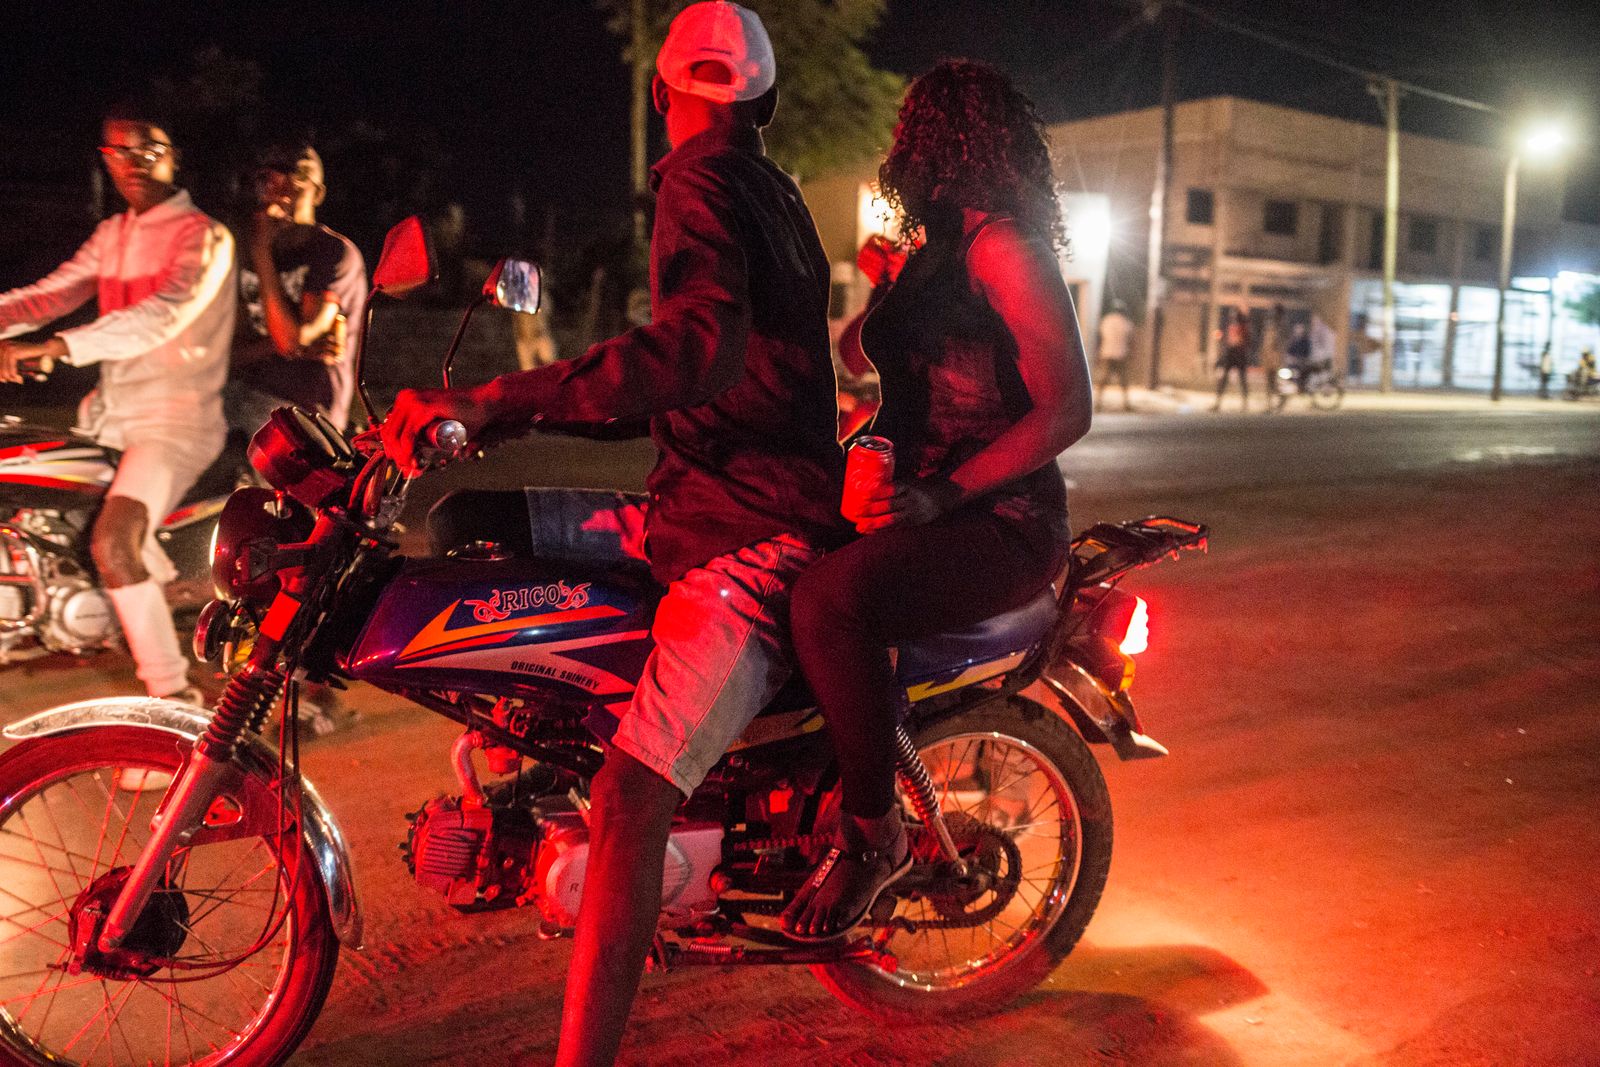 © TaraTW - A sex worker gets on a clients motorbike in Tete, Tete province, Mozambique May 11, 2018.